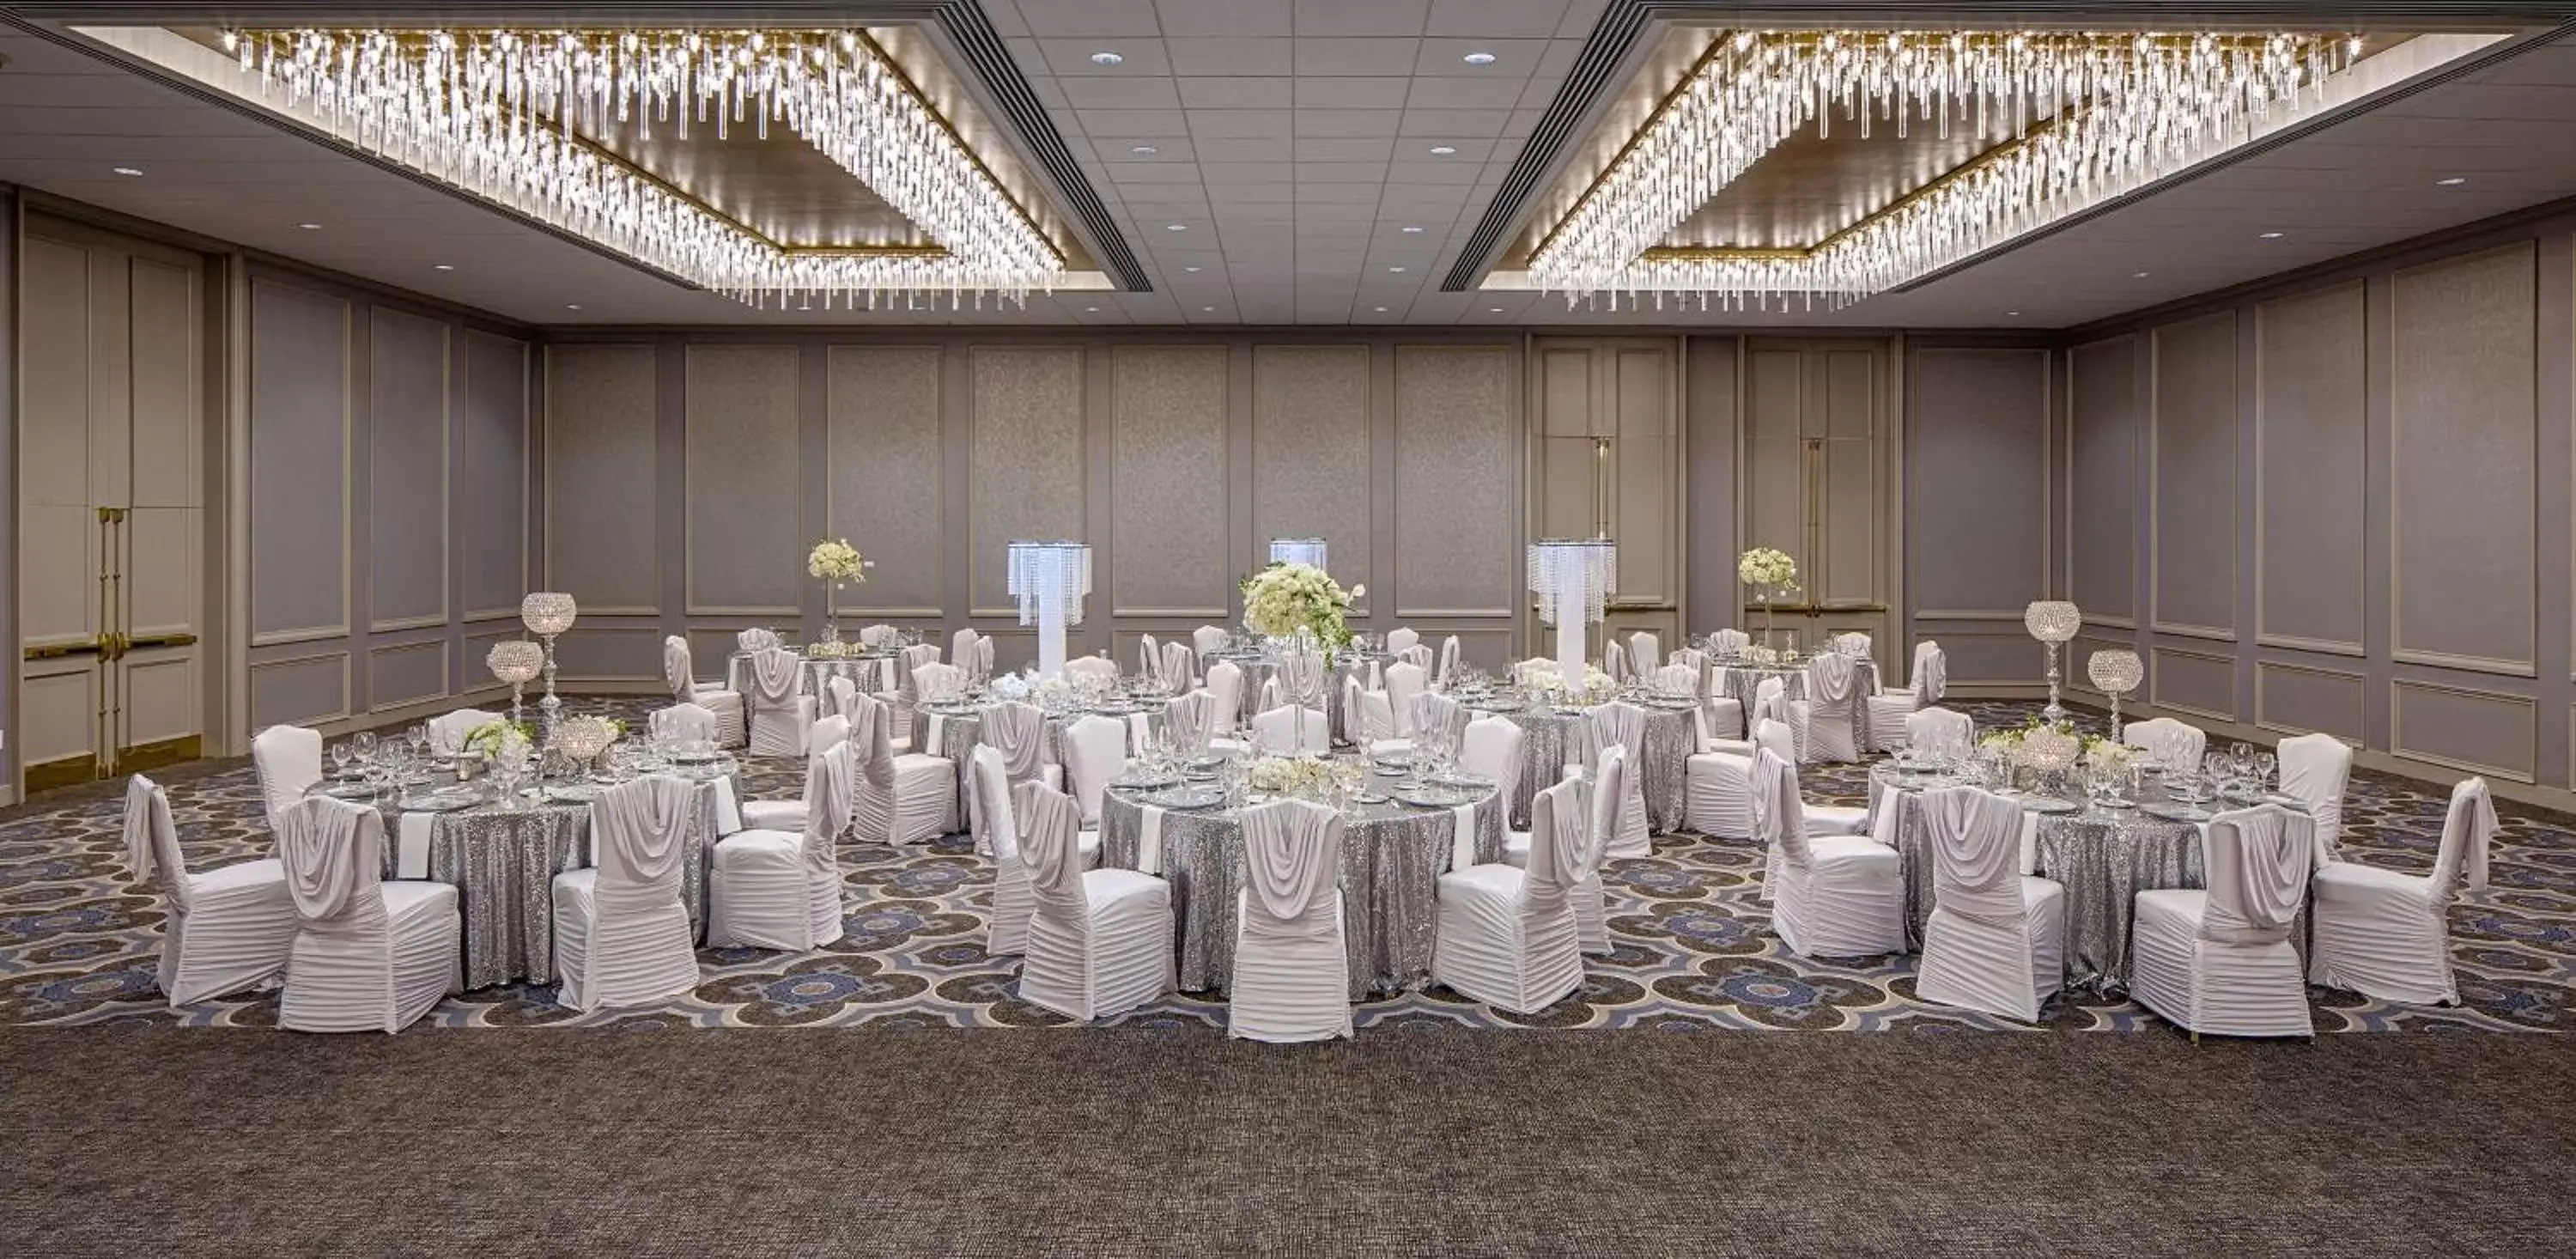 Meeting/conference room, Banquet Facilities in DoubleTree by Hilton Hotel Houston Greenway Plaza